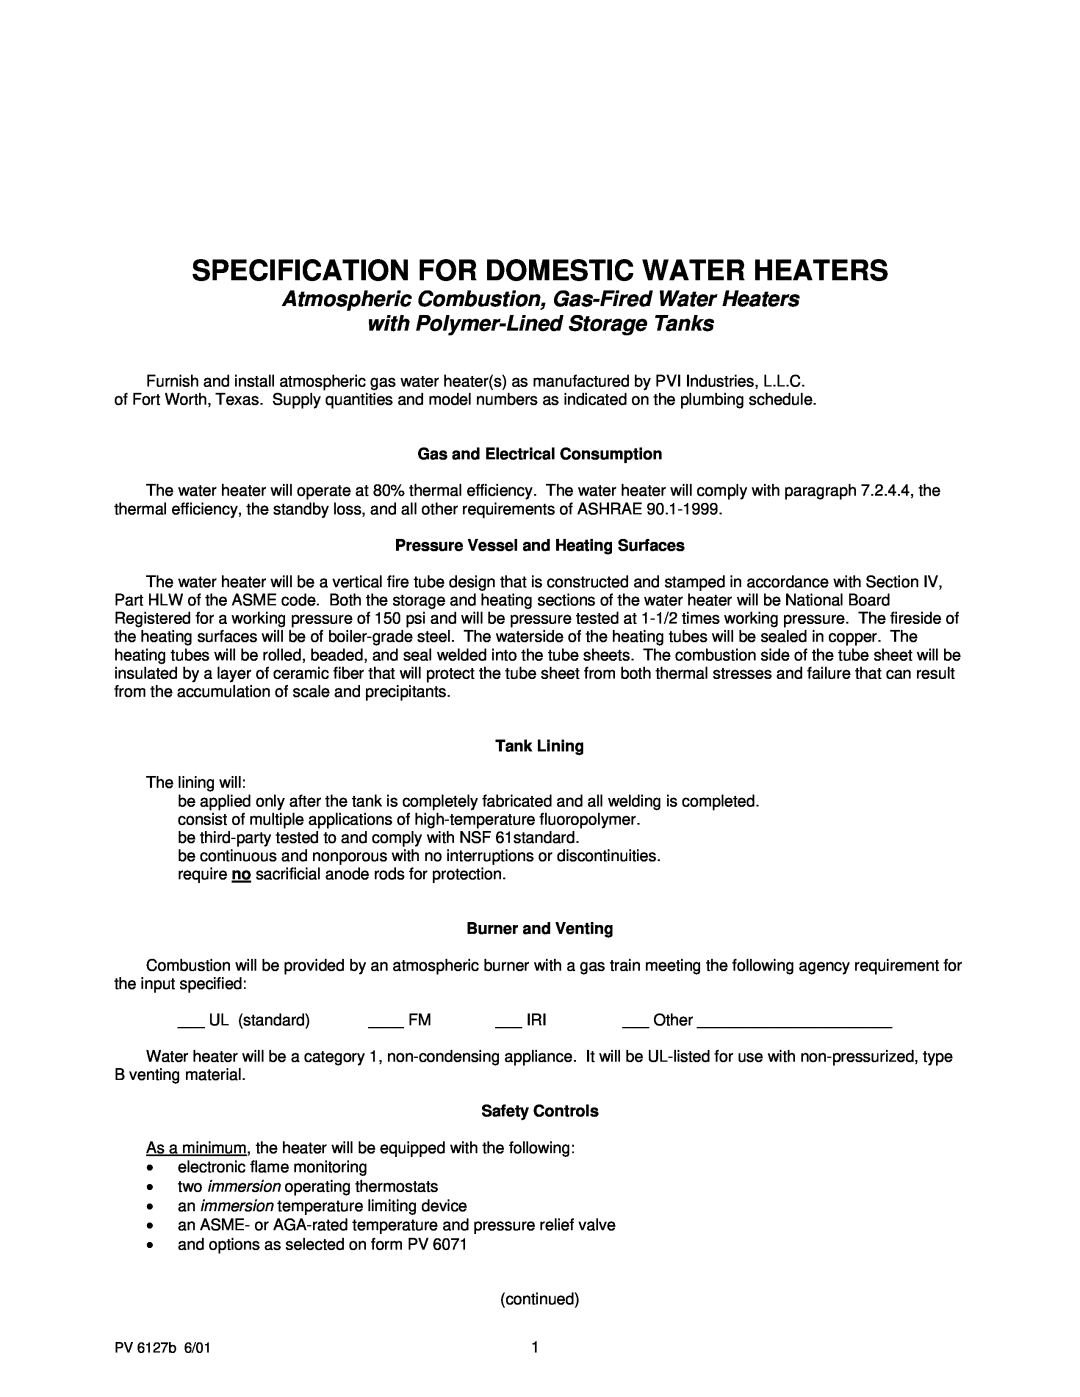 PVI Industries PV 6127b manual Specification For Domestic Water Heaters, Atmospheric Combustion, Gas-FiredWater Heaters 